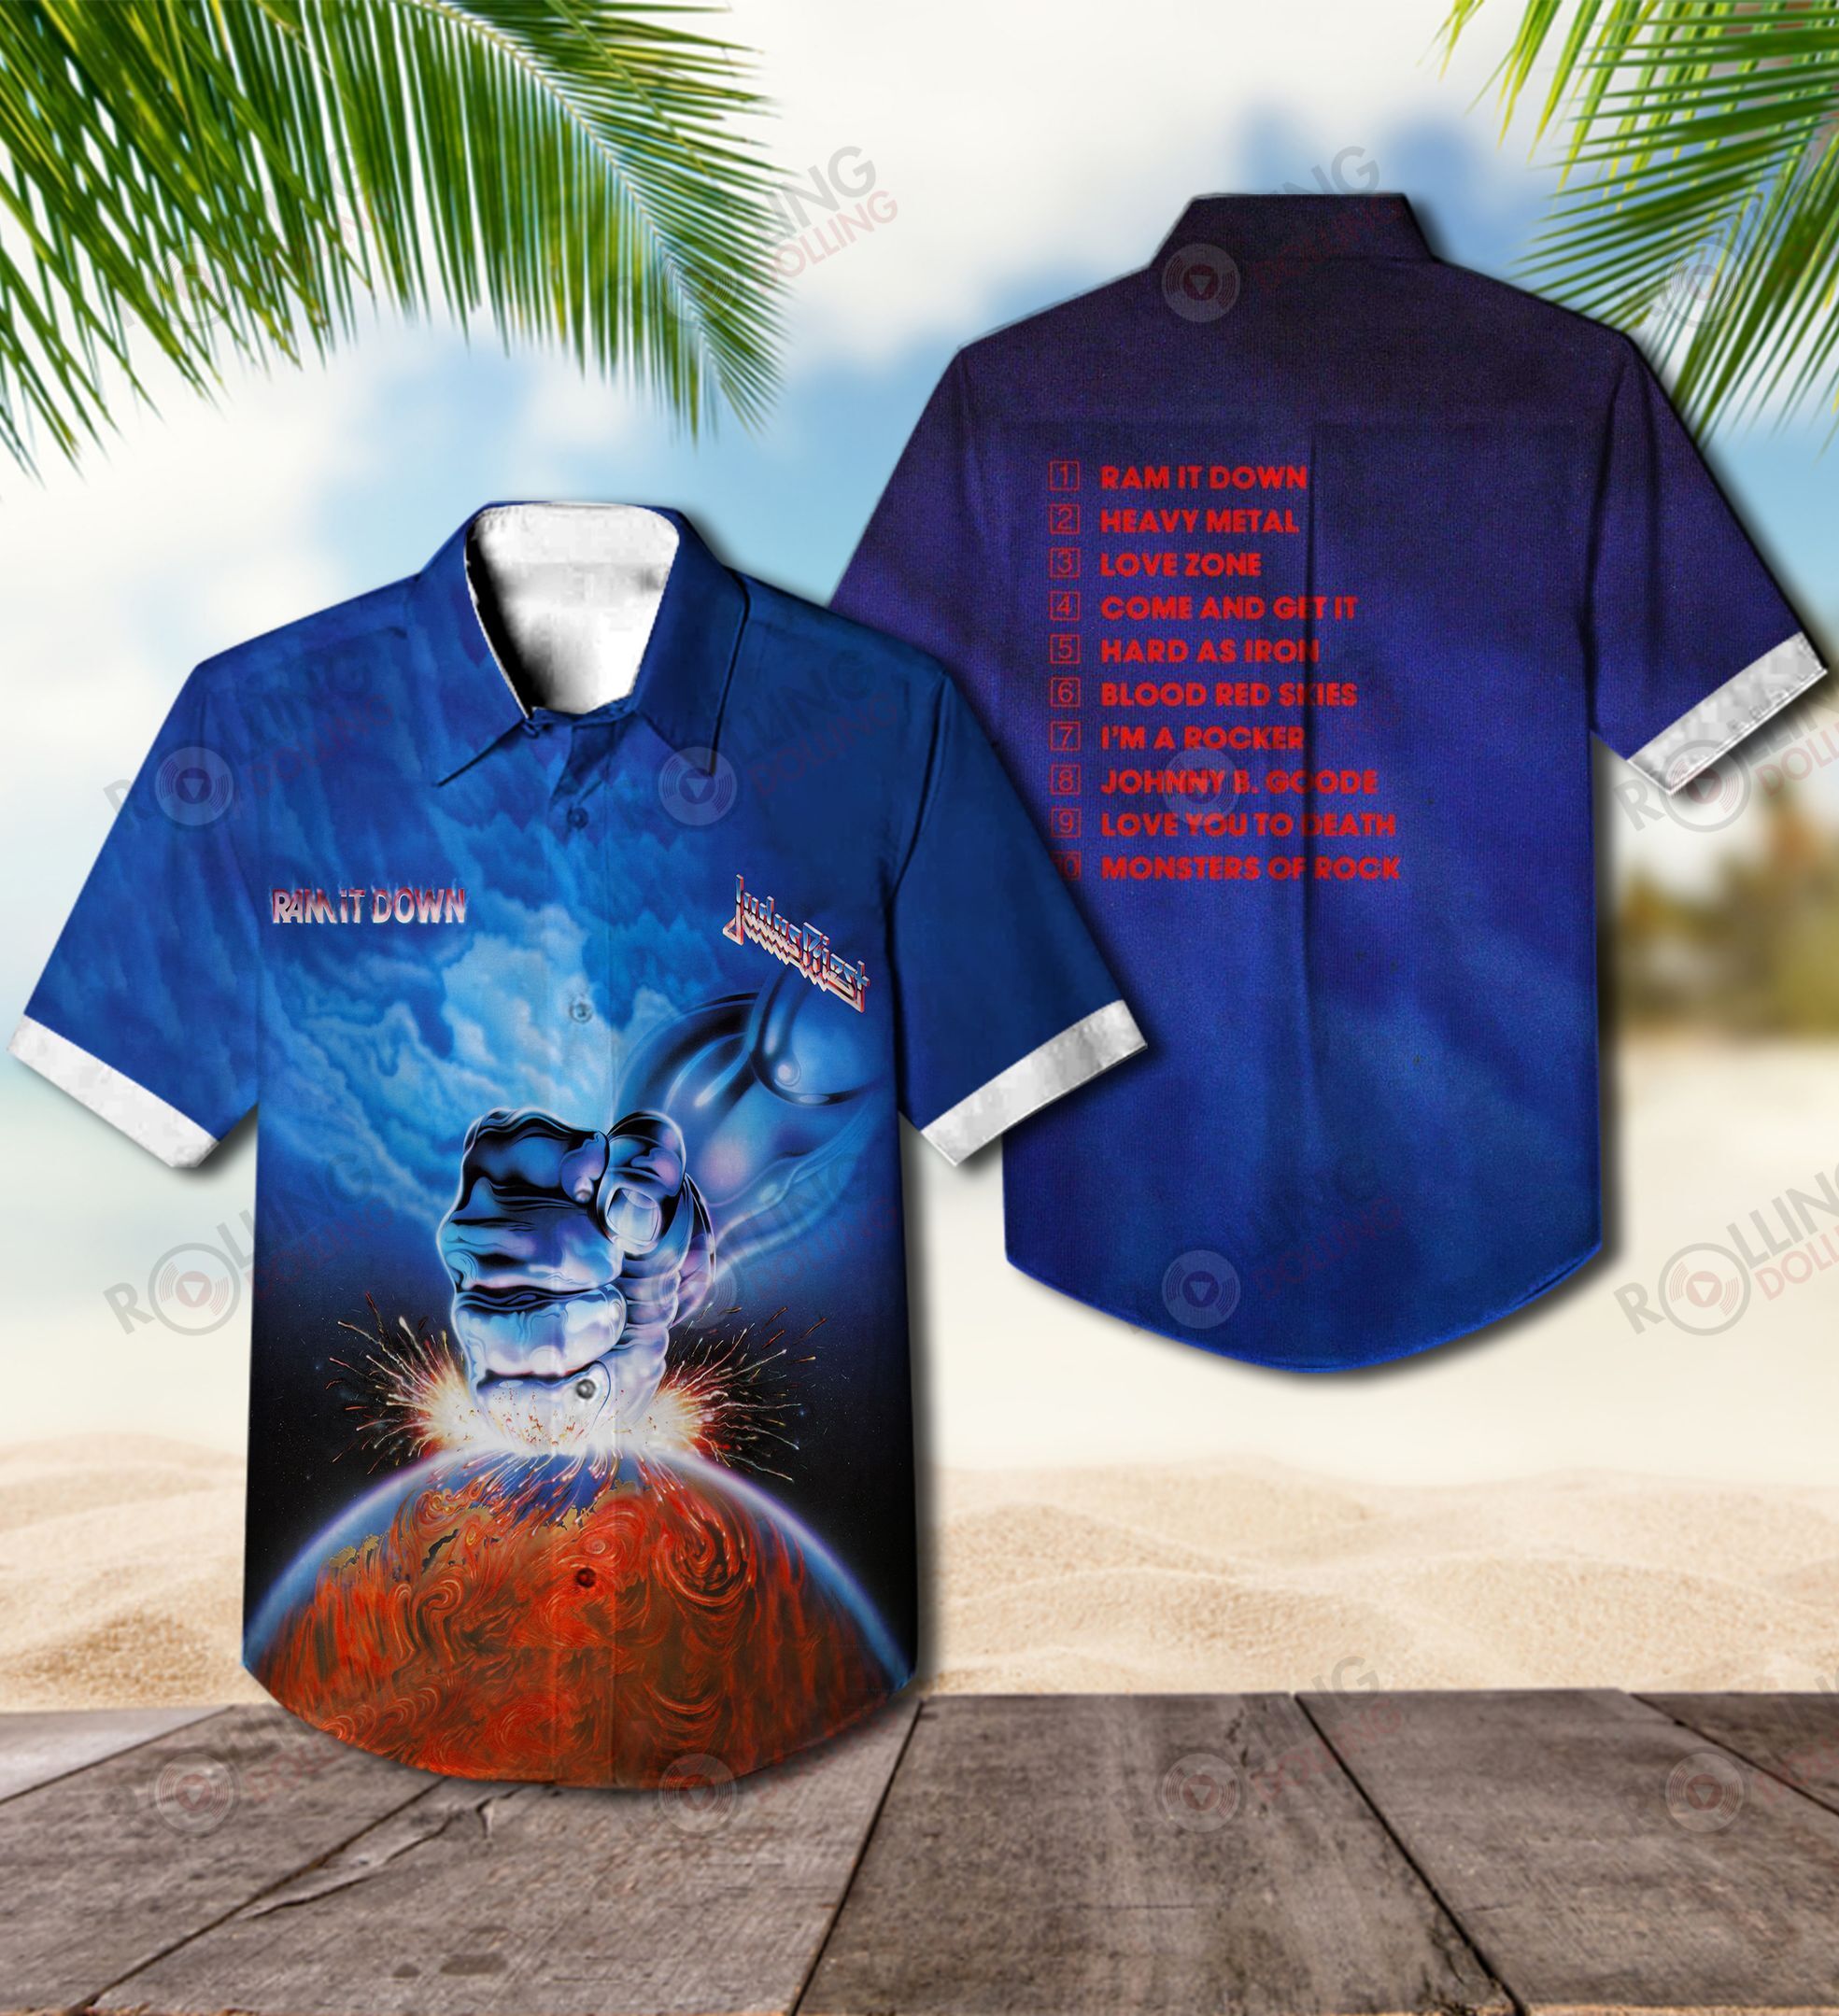 Check out these top 100+ Hawaiian shirt so cool for rock fans 207